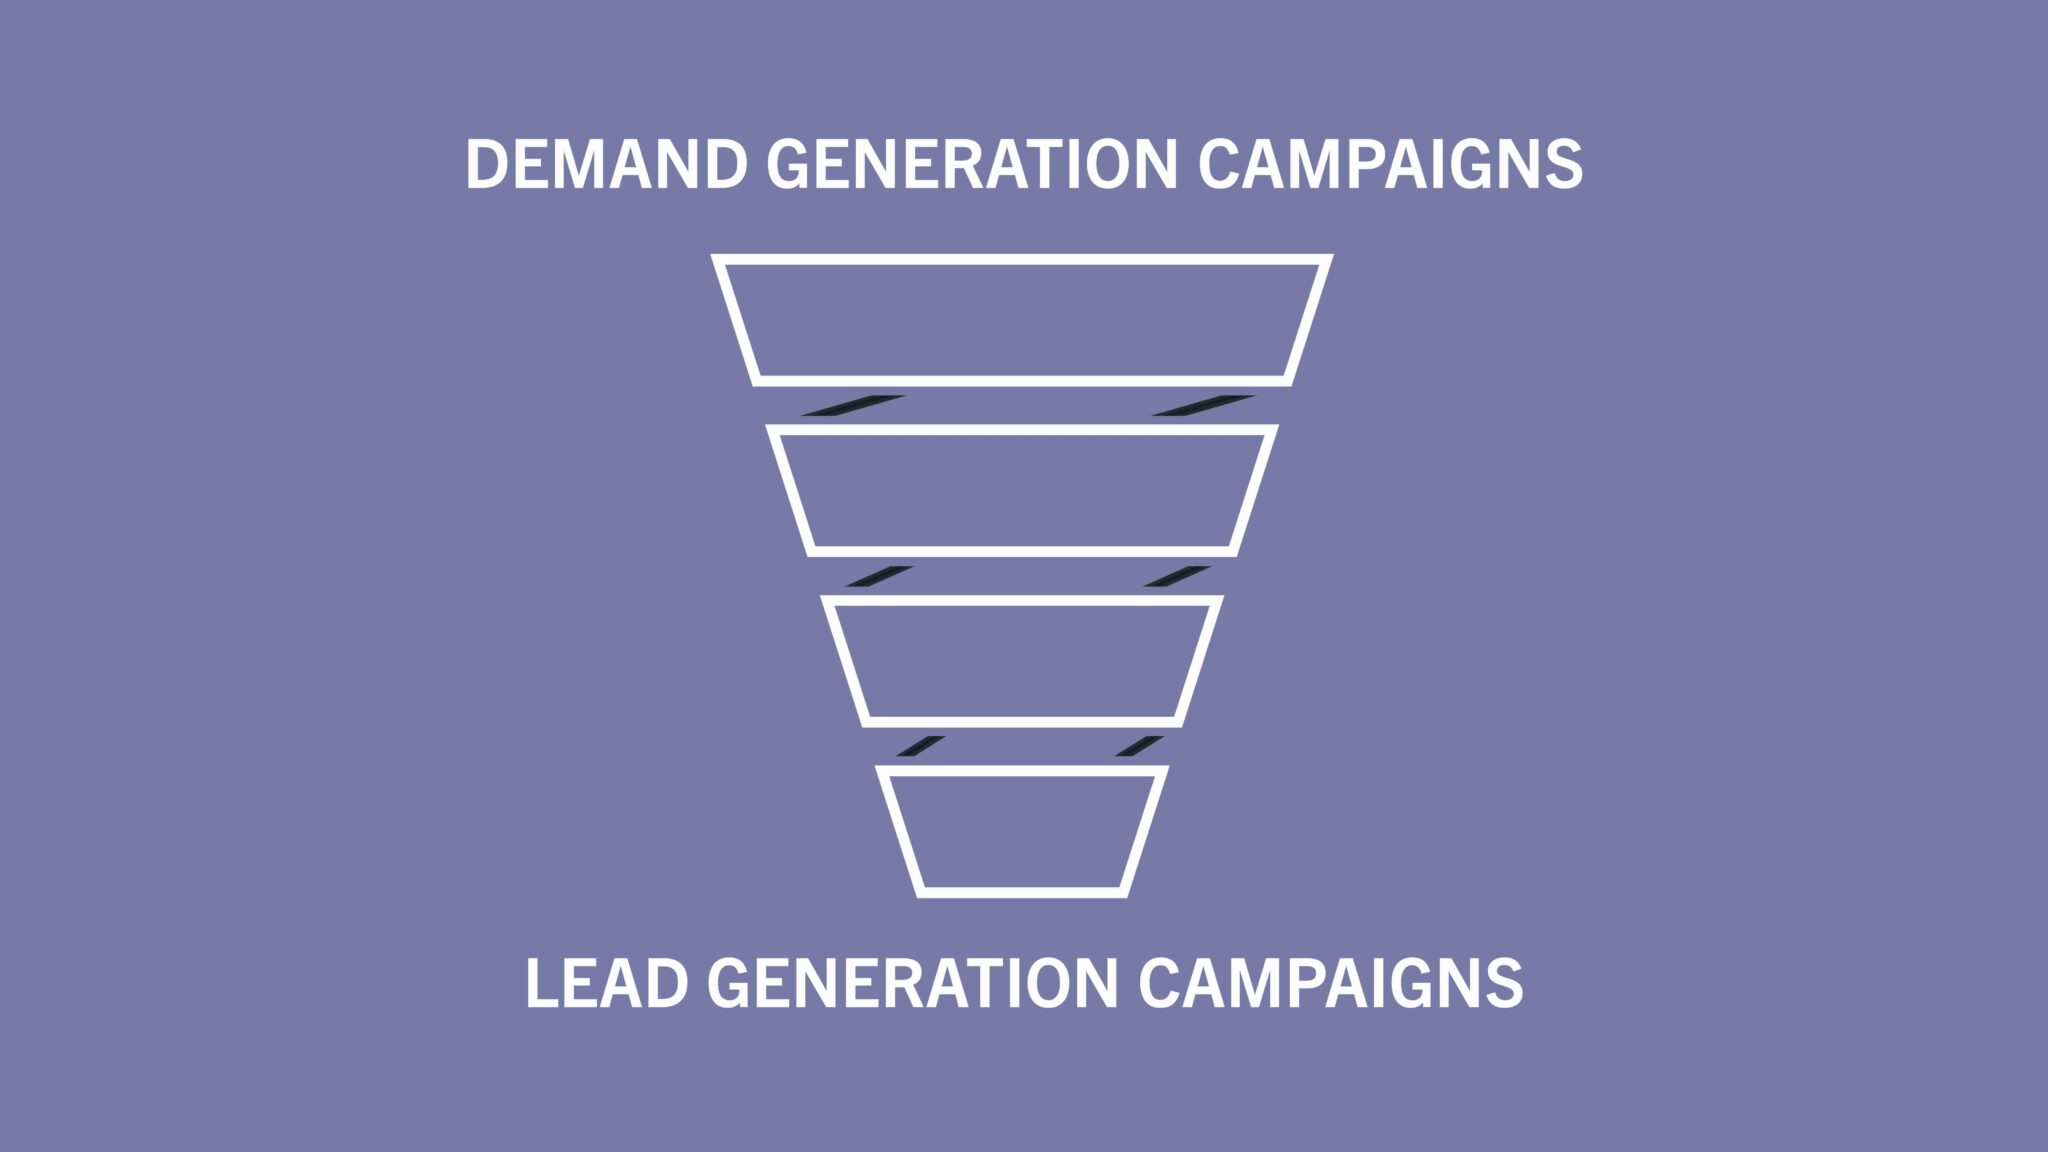 alignment between demand and lead generation strategies